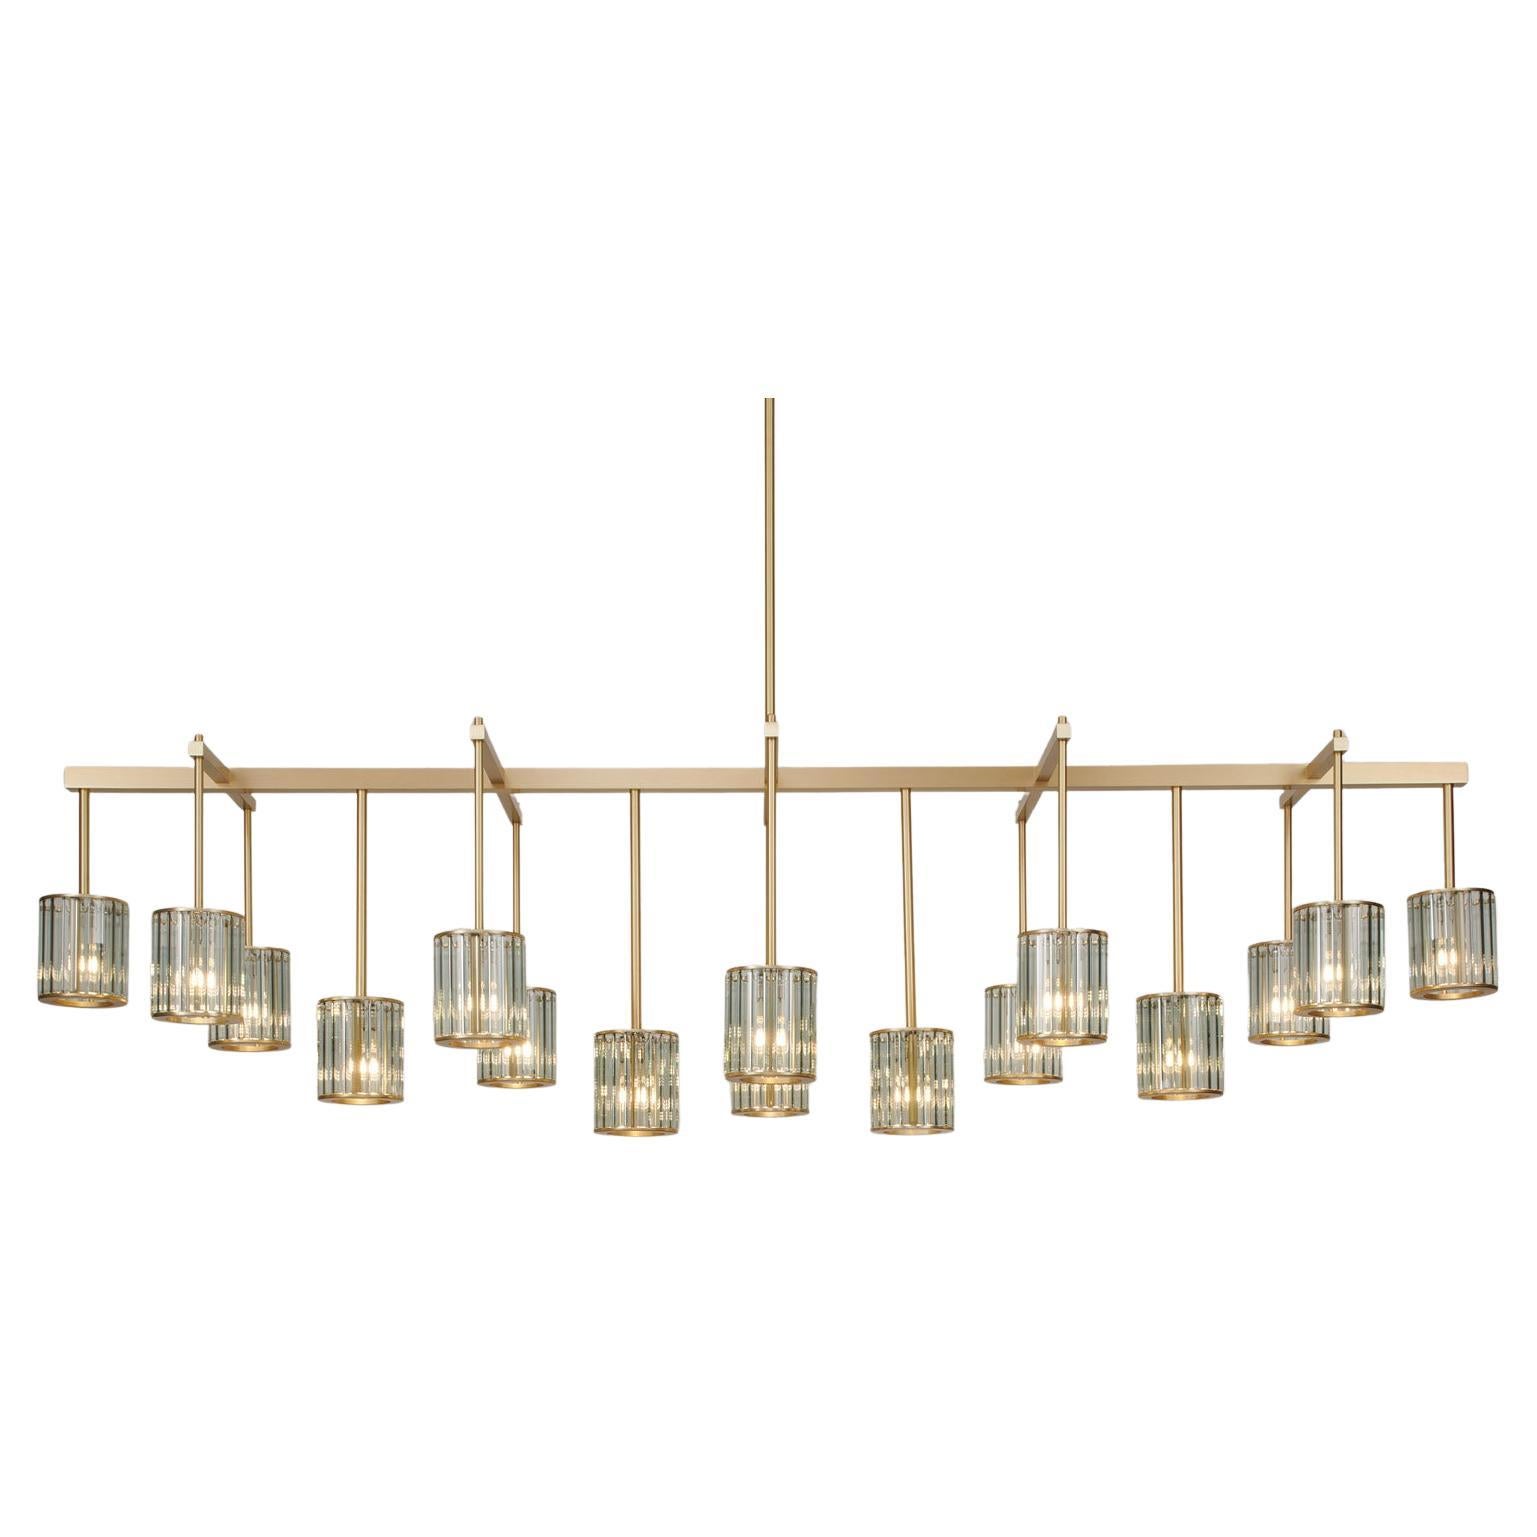 Flute Beam Chandelier with 16 Arms in Brushed Brass and Smoke Glass Diffusers  For Sale